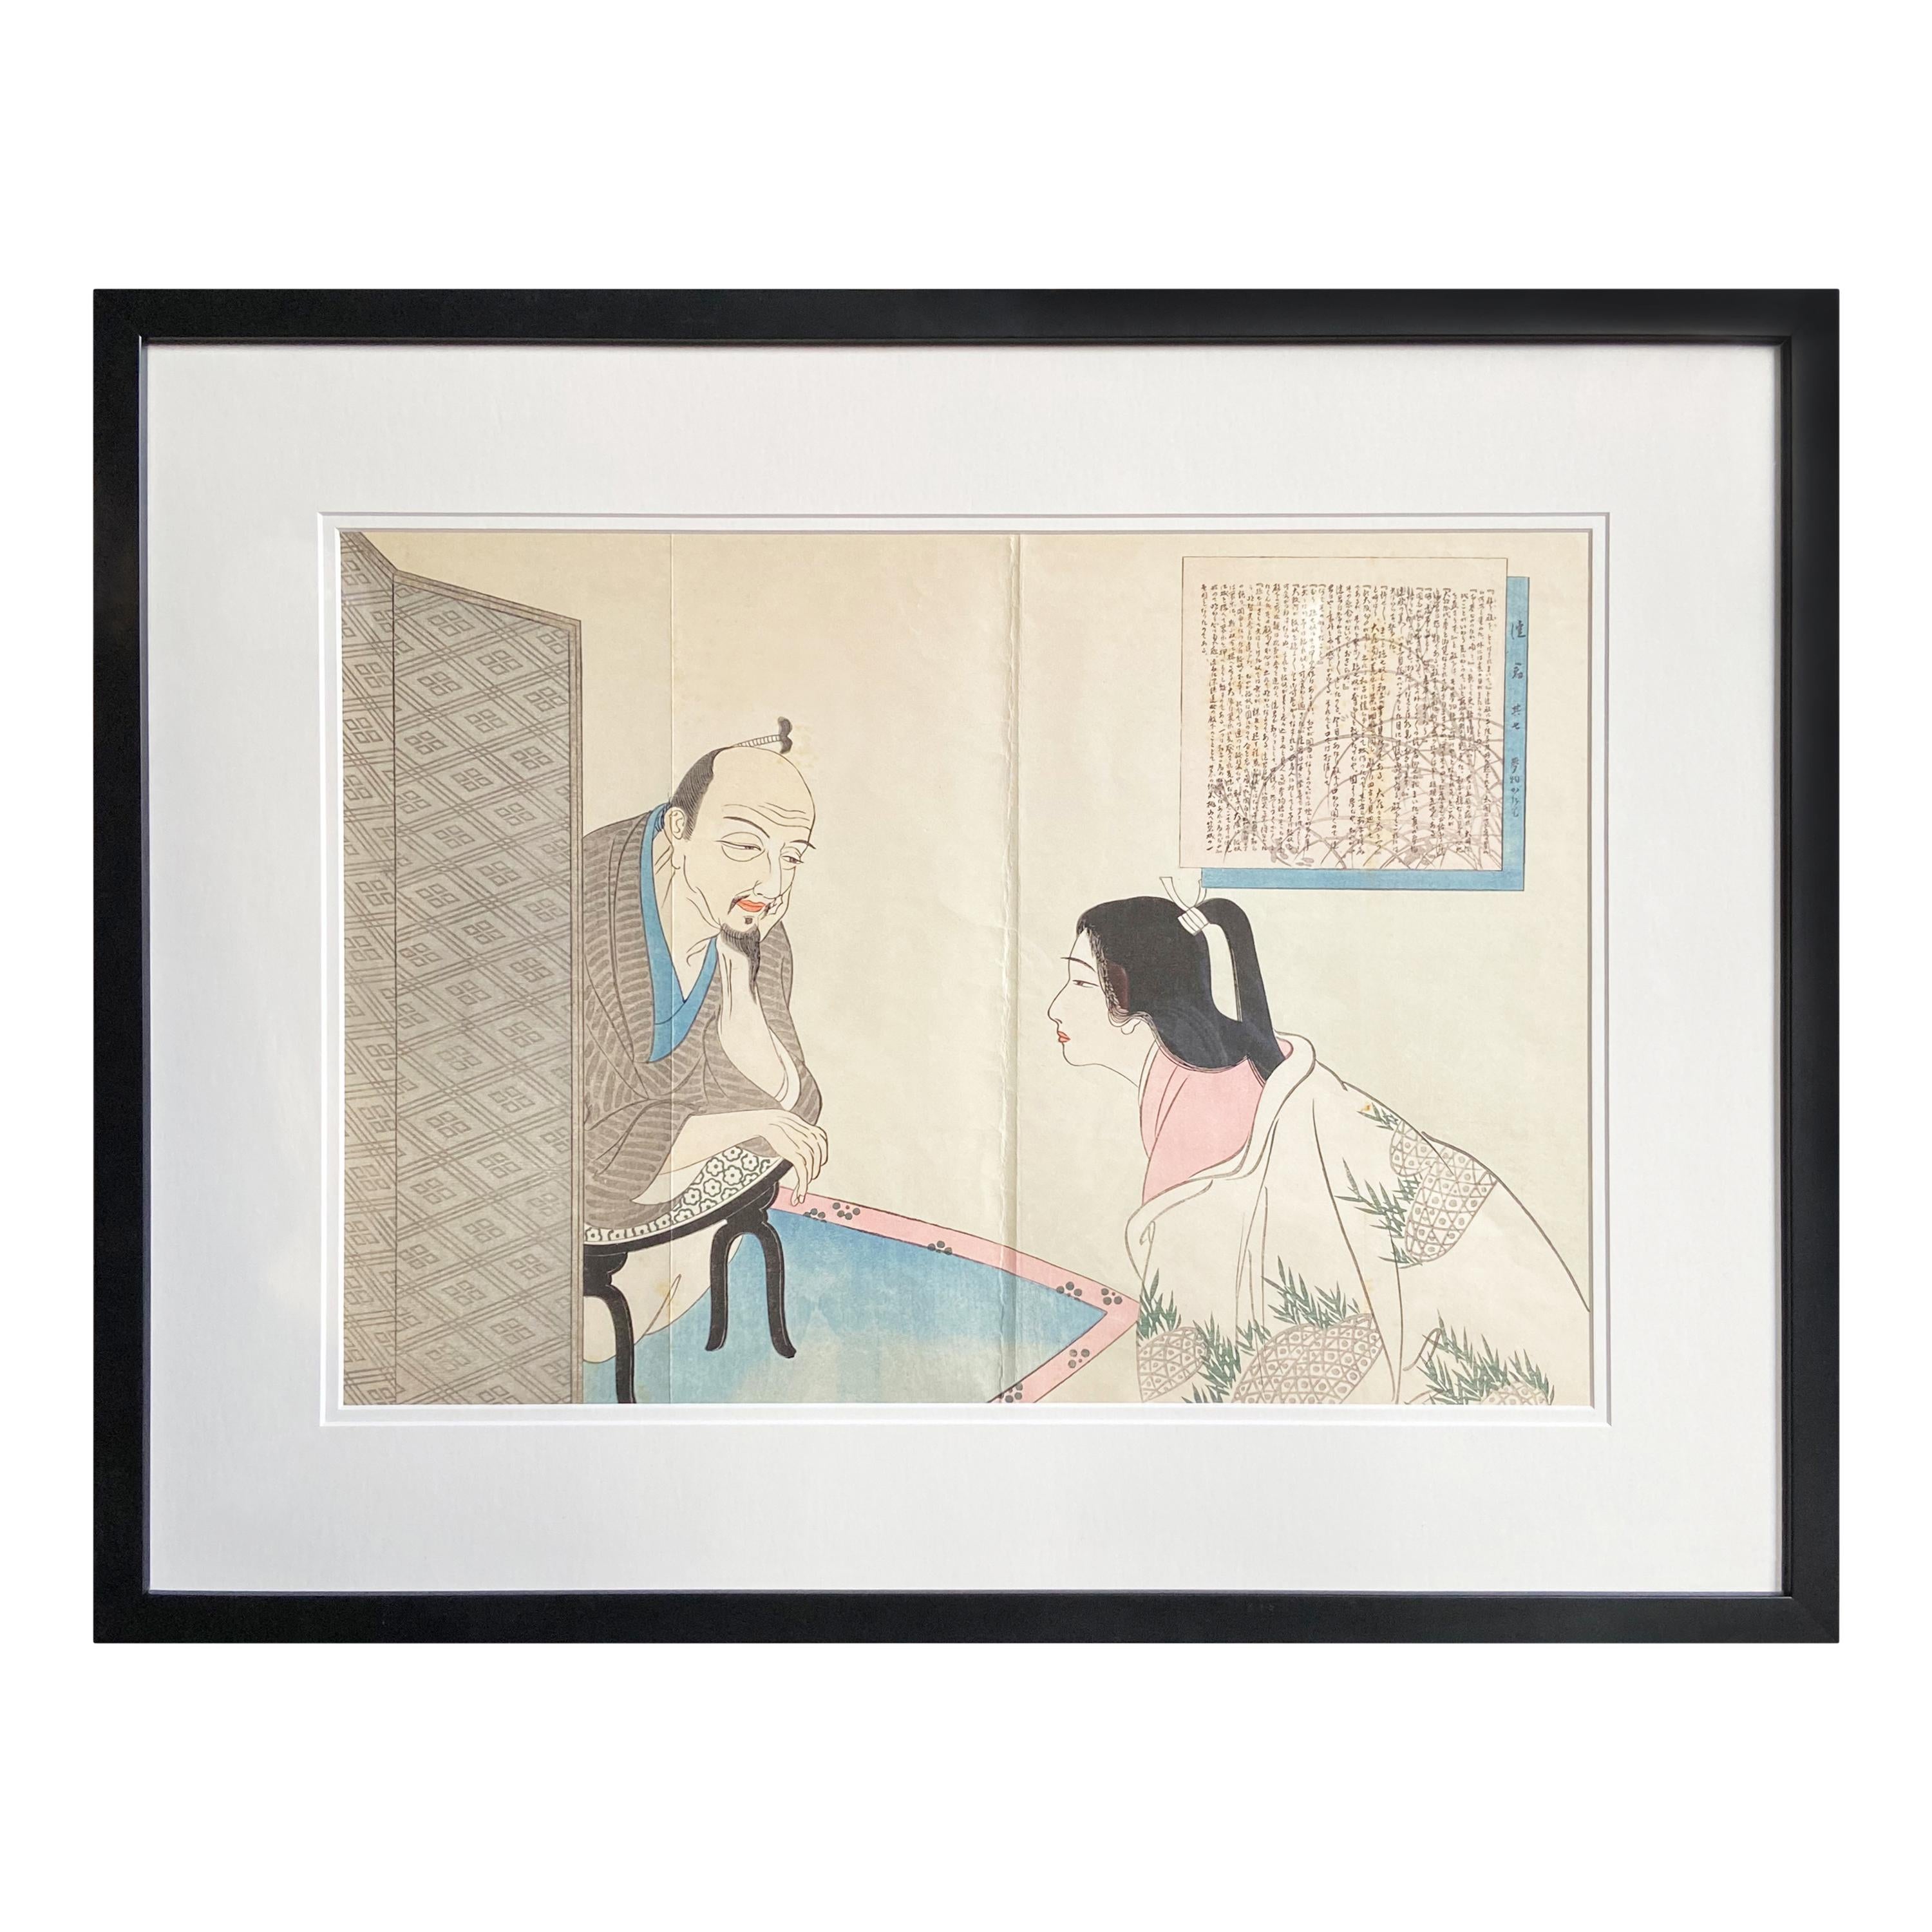 An antique Japanese woodblock print from the 19th century depicting a man and a woman discussing. Created in Japan during the 19th century, this woodblock print showcases an interior scene depicting a man and a woman discussing with each other. The